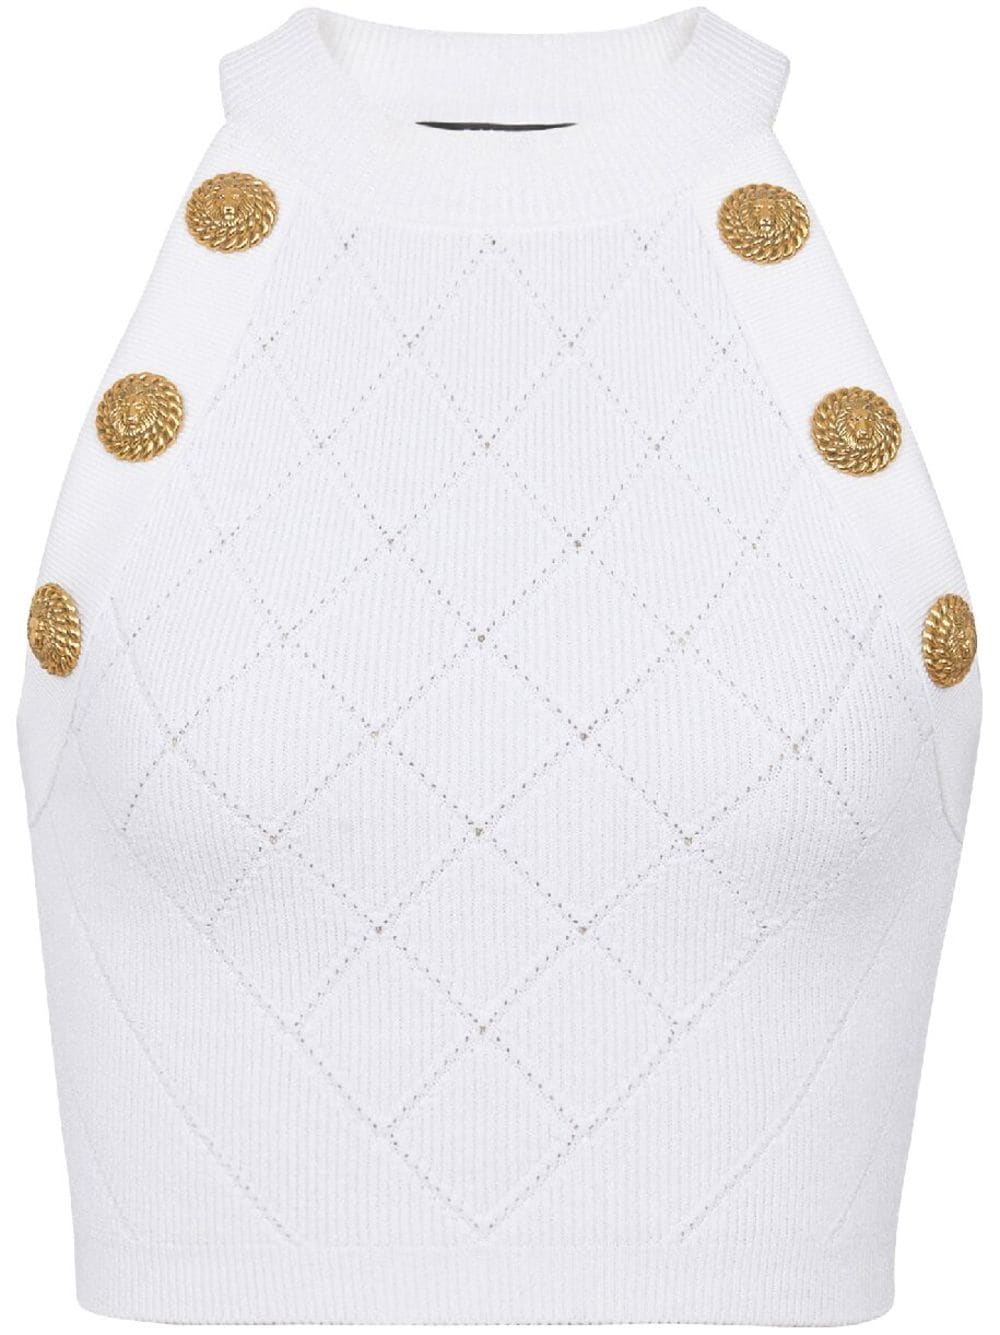 BALMAIN White Knit Crop Top with Gold Buttons and Sustainable Fabric - SS24